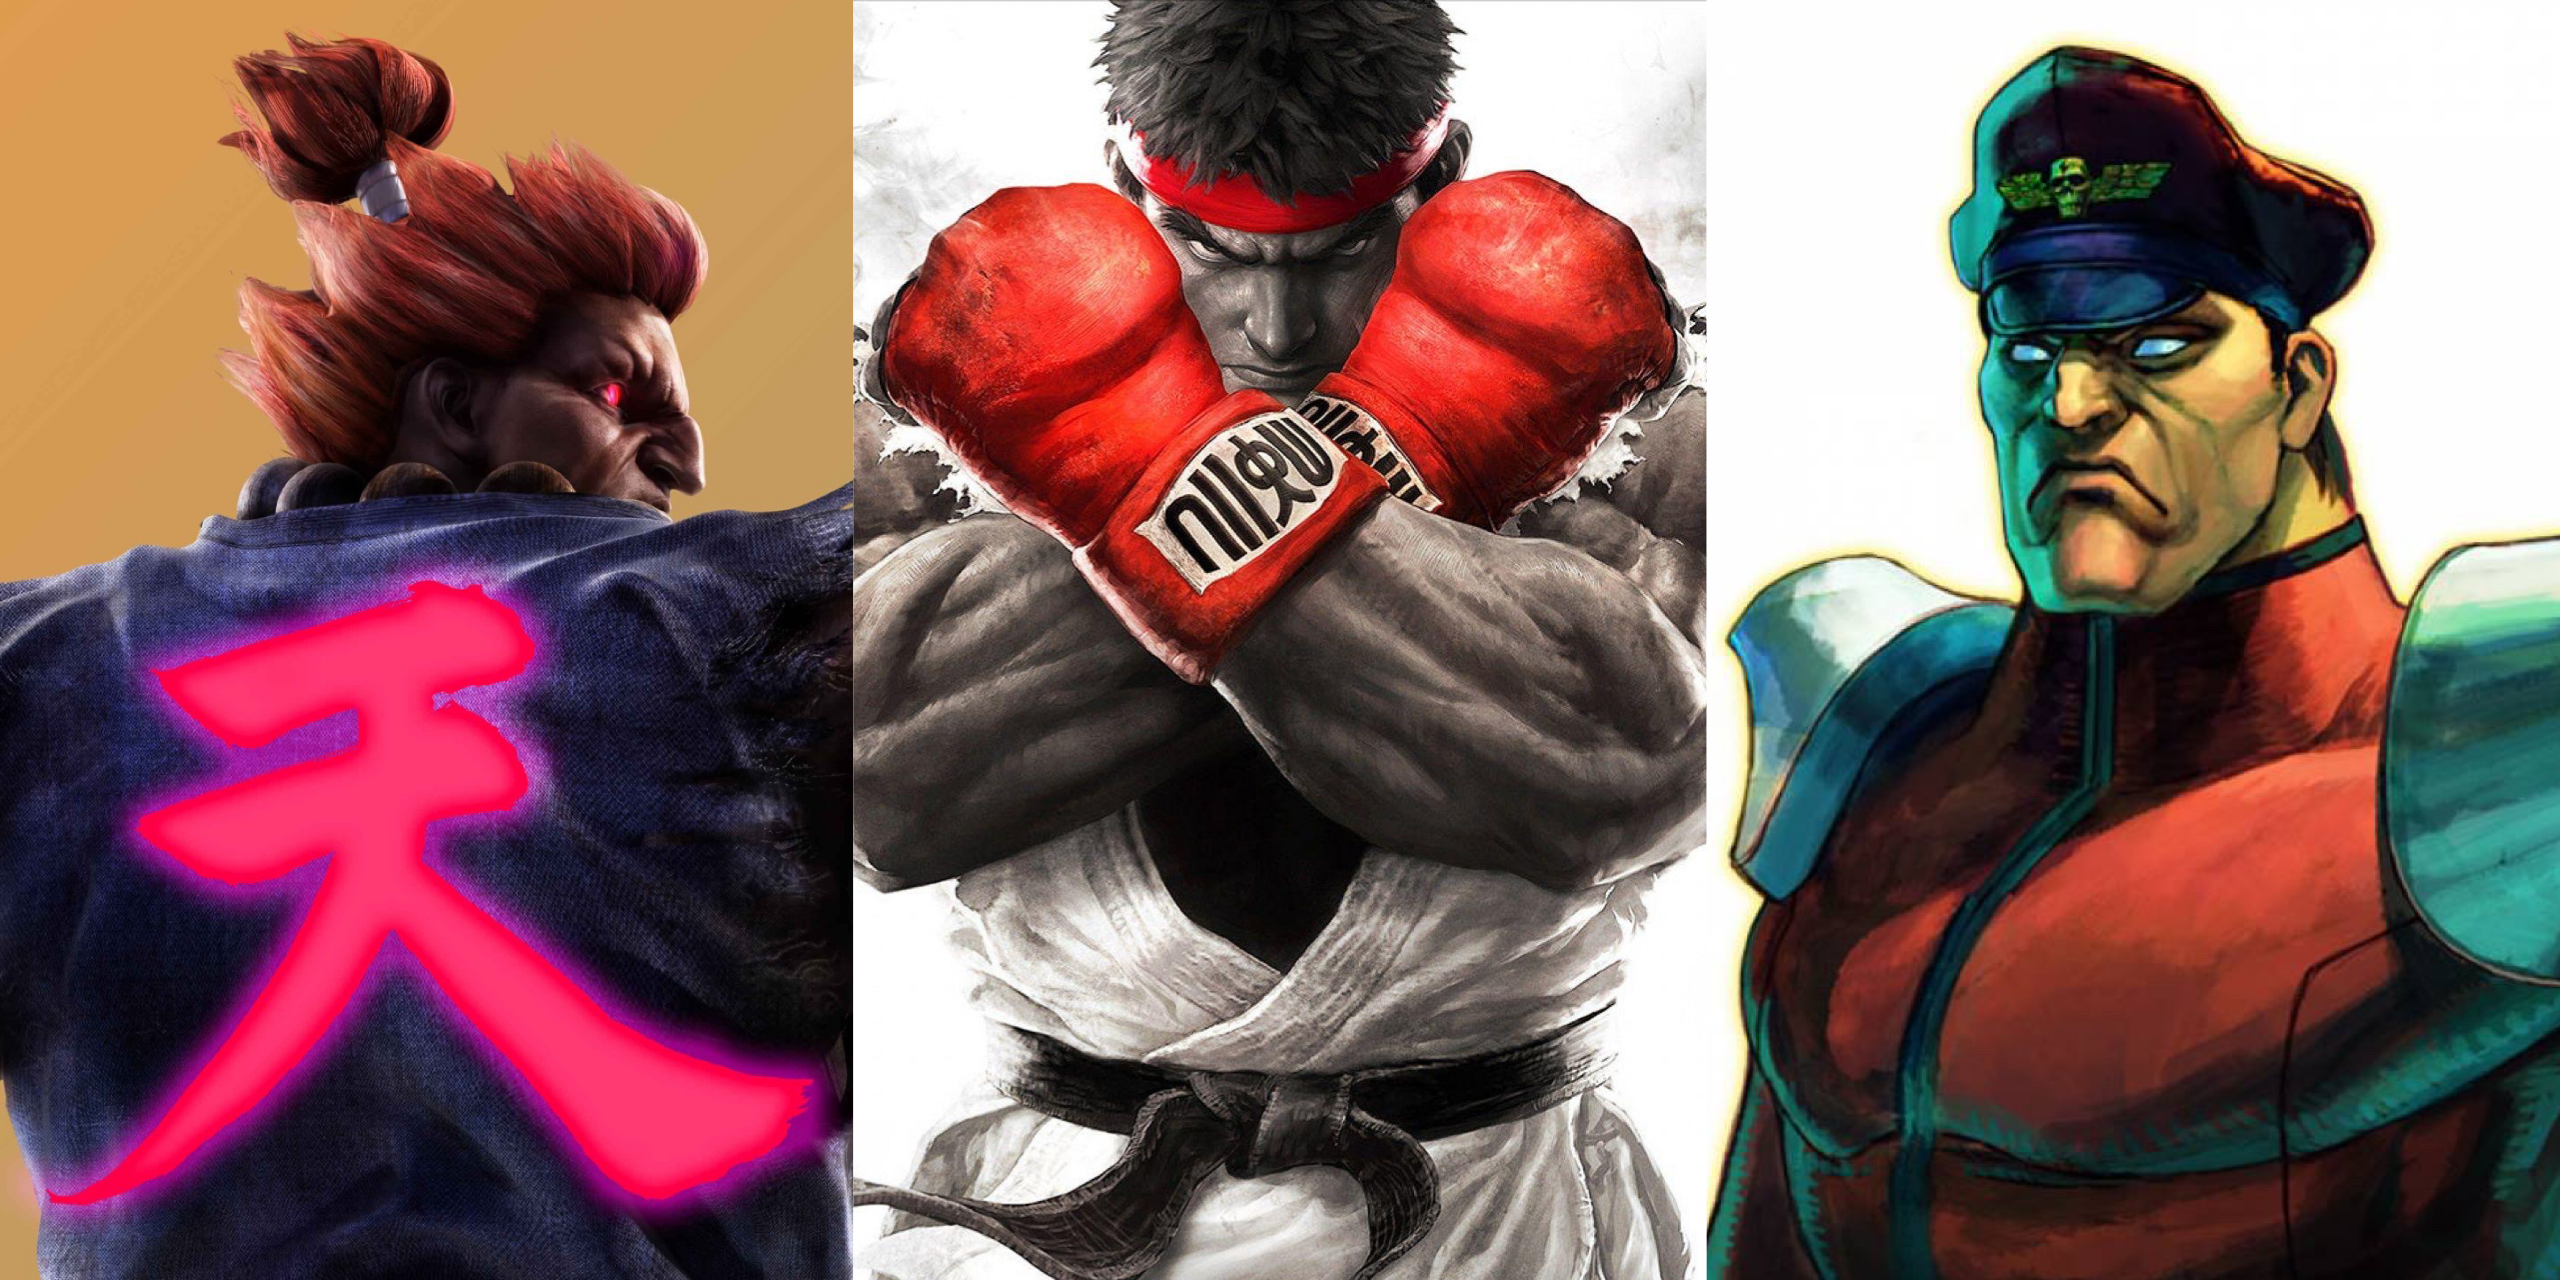 Split image featuring Akuna, Ryu, and M. Bison from the Street Fighter franchise